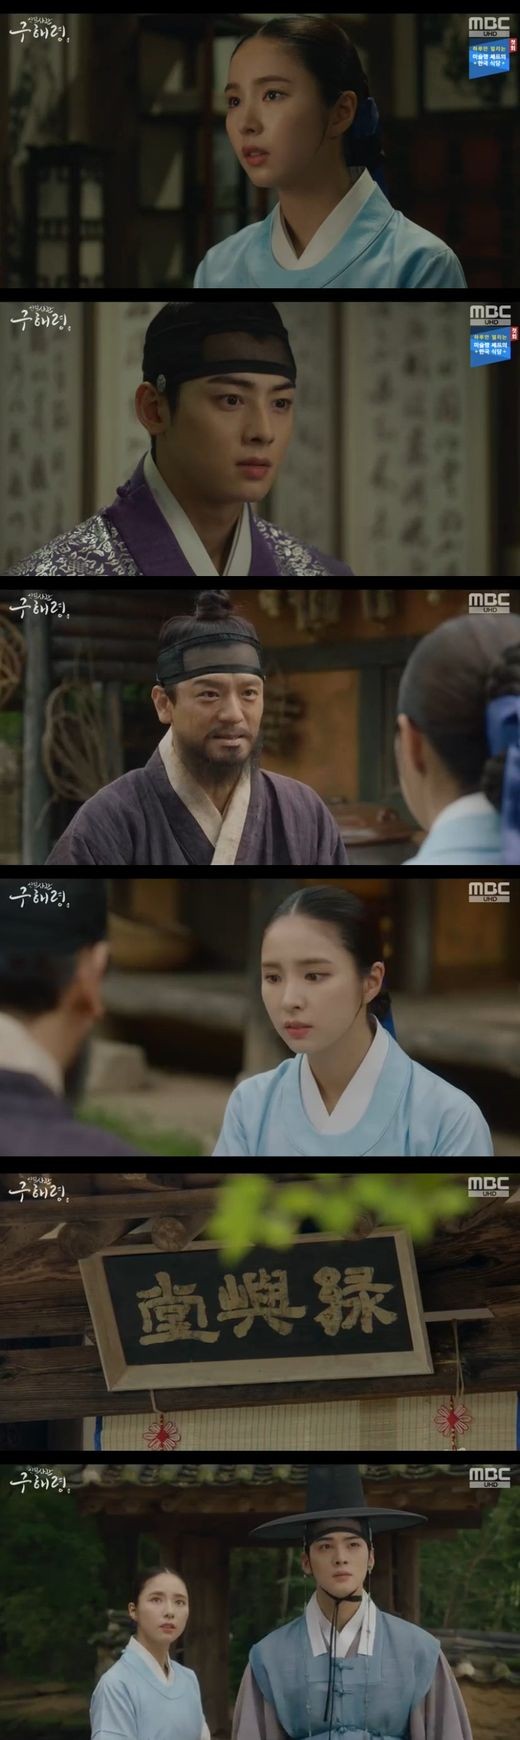 The truth that history has hidden: Cha Eun-woo has taken another step closer to the secret of birth.In MBCs Rookie Historian Goo Hae-ryung broadcast on the 19th, Lee Lim (Cha Eun-woo) was shown investigating the lungs with the help of Rookie Historian Goo Hae-ryung.Lee Jin, who is no longer telling me about the lungs, said, I want to know about me, not the lungs.Did you know that the day I was born, your brother would raise a military?Lee Jin explained that it is just a coincidence if there is no meaning, If it is just a coincidence, why is there not a record of my birth?I can not see my name anywhere. Lee Jin was visibly embarrassed, but said, I was avoiding the foreign language for a while while the king was preparing the majesty.Its outside the house. Lee Jin also said, Dont forget, youre my family and my only brother.But Irim sought to find it and hear the truth. Rookie Historian Goo Hae-ryung was accompanied by him.Irim said, Have you ever loved Soza for a moment? I am asking if I am a son.Rookie Historian Goo Hae-ryung wrapped around the wounded lily.With the advent of the taboo overturning the adjustment, Lee Jin investigated the derelict; history recorded it as the monarch who saved the country from the derelict.Rookie Historian Goo Hae-ryung met the truth of the lungs through a book about the story of Hodam and Yeongam.In the past, Hodam had a long-time friend Yeongam and a family of Seorae One, but malicious rumors spread in the palace, which spread to the egg, and Hodam and Yeongam died at the end.Hotham was the Baro lord.This book was written by Koo Jae-kyung (Fairy Hwan). Rookie Historian Goo Hae-ryung said to Koo Jae-kyung, Is the person who framed these two people the current Lord and the Lord?Why did you tell me? I dont even know It, and Ive been going in and out every day.Irim told Rookie Historian Goo Hae-ryung, I want to know, there is no record of me in the One and no one tells me the truth, but I need to know.What happened the day I was born and the King was murdered. He was confident that he could handle even the fact he didnt want to believe.Rookie Historian Goo Hae-ryung led the Lee Lim and met the only survivor of the One incident.He was delighted to learn that Rookie Historian Goo Hae-ryung was Yeongams daughter.Kim Bong-kyos will is to find a green forest, and Irim immediately found the green sorghum, an island with a green sorghum.Whether Irim could find the Sacho and reveal the secret of his birth. The development of the new officer Rookie Historian Goo Hae-ryung became more exciting.